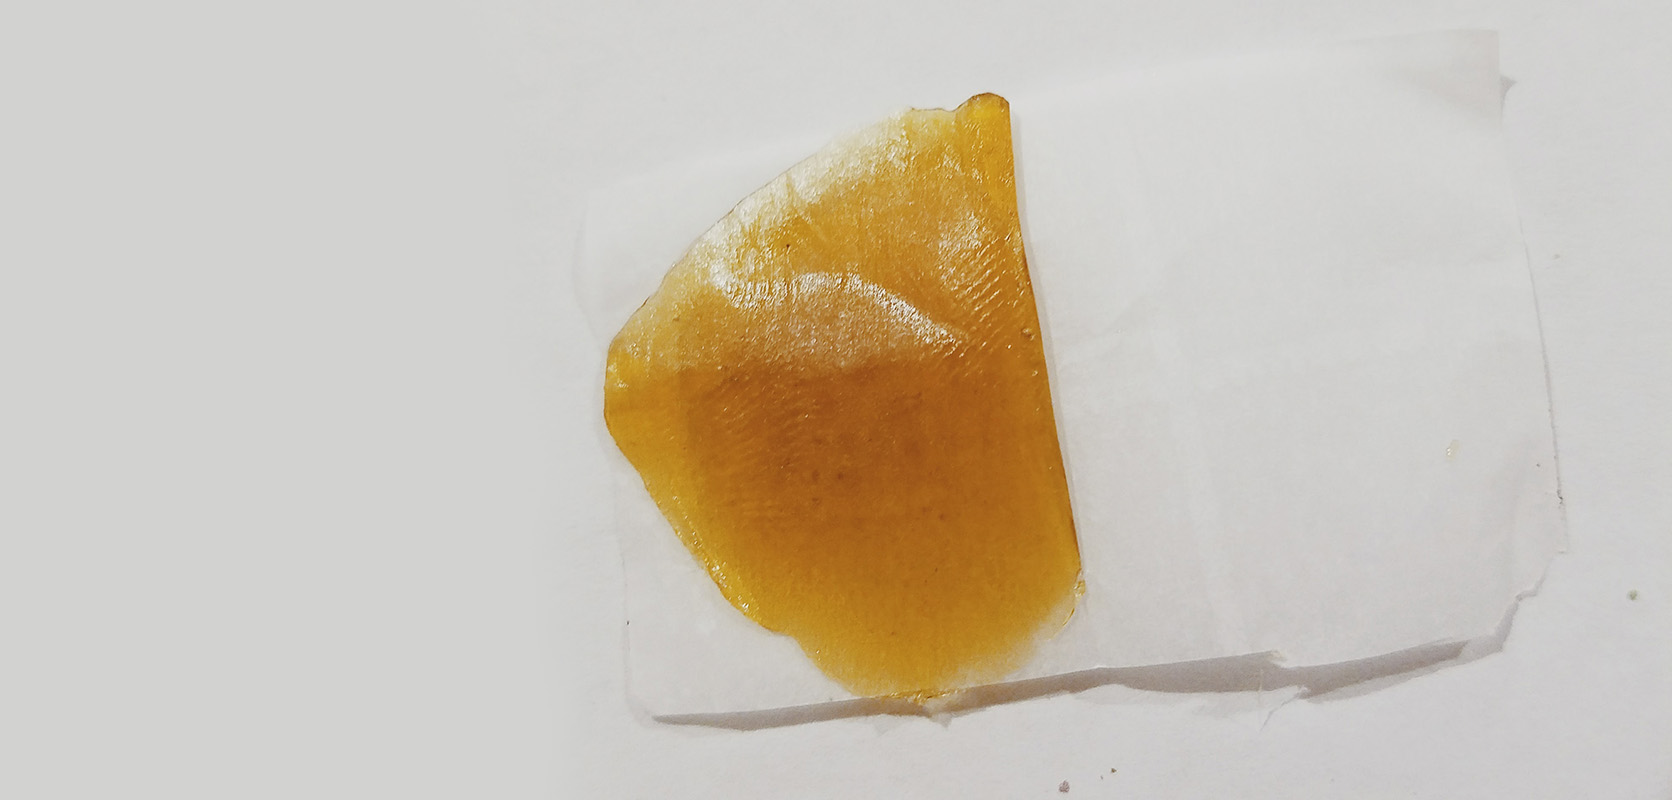 Shatter dab drug cannabis concentrate for sale online from BC cannabis online dispensary Canada. How to store shatter. Buy weed online.